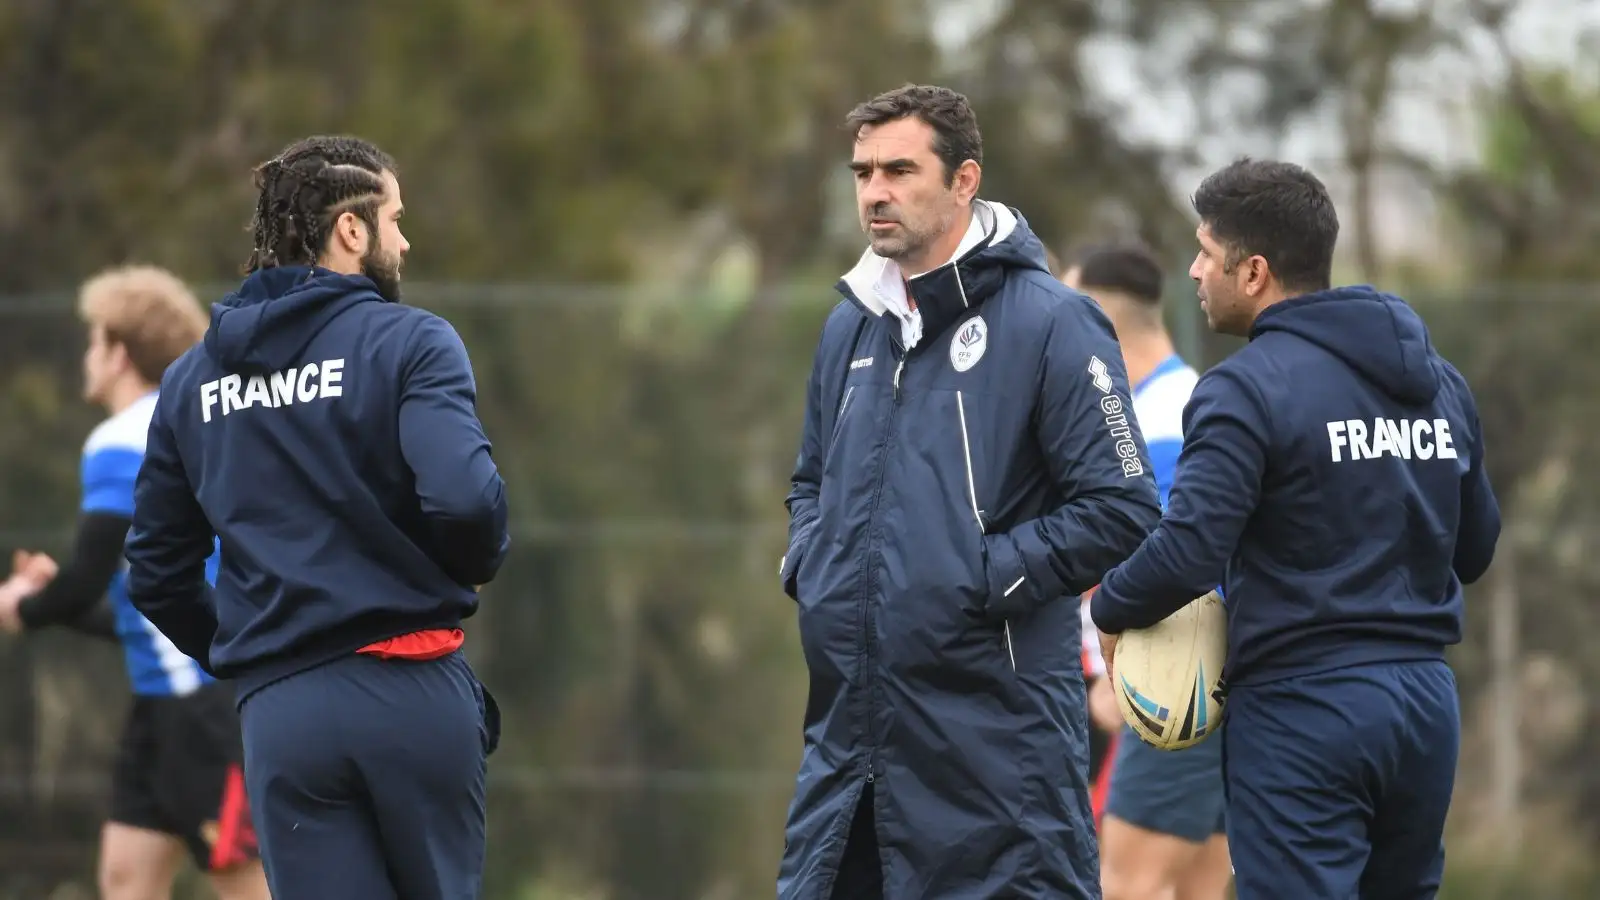 Laurent Frayssinous confirms 20-man France squad to face England